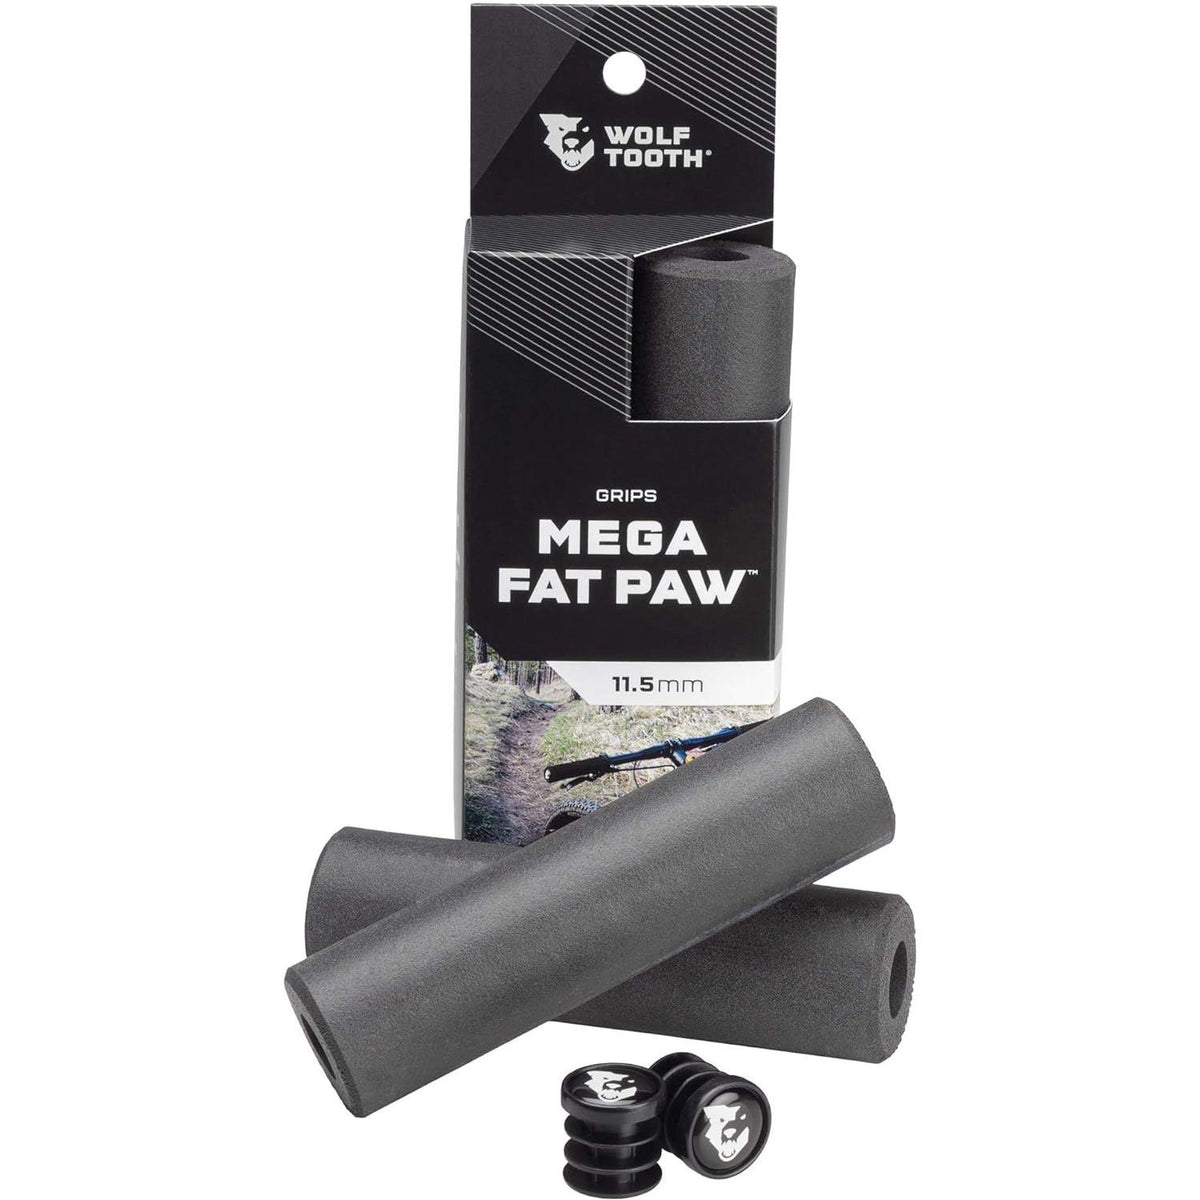 Wolf Tooth Mega Fat Paw Grip 11.5mm